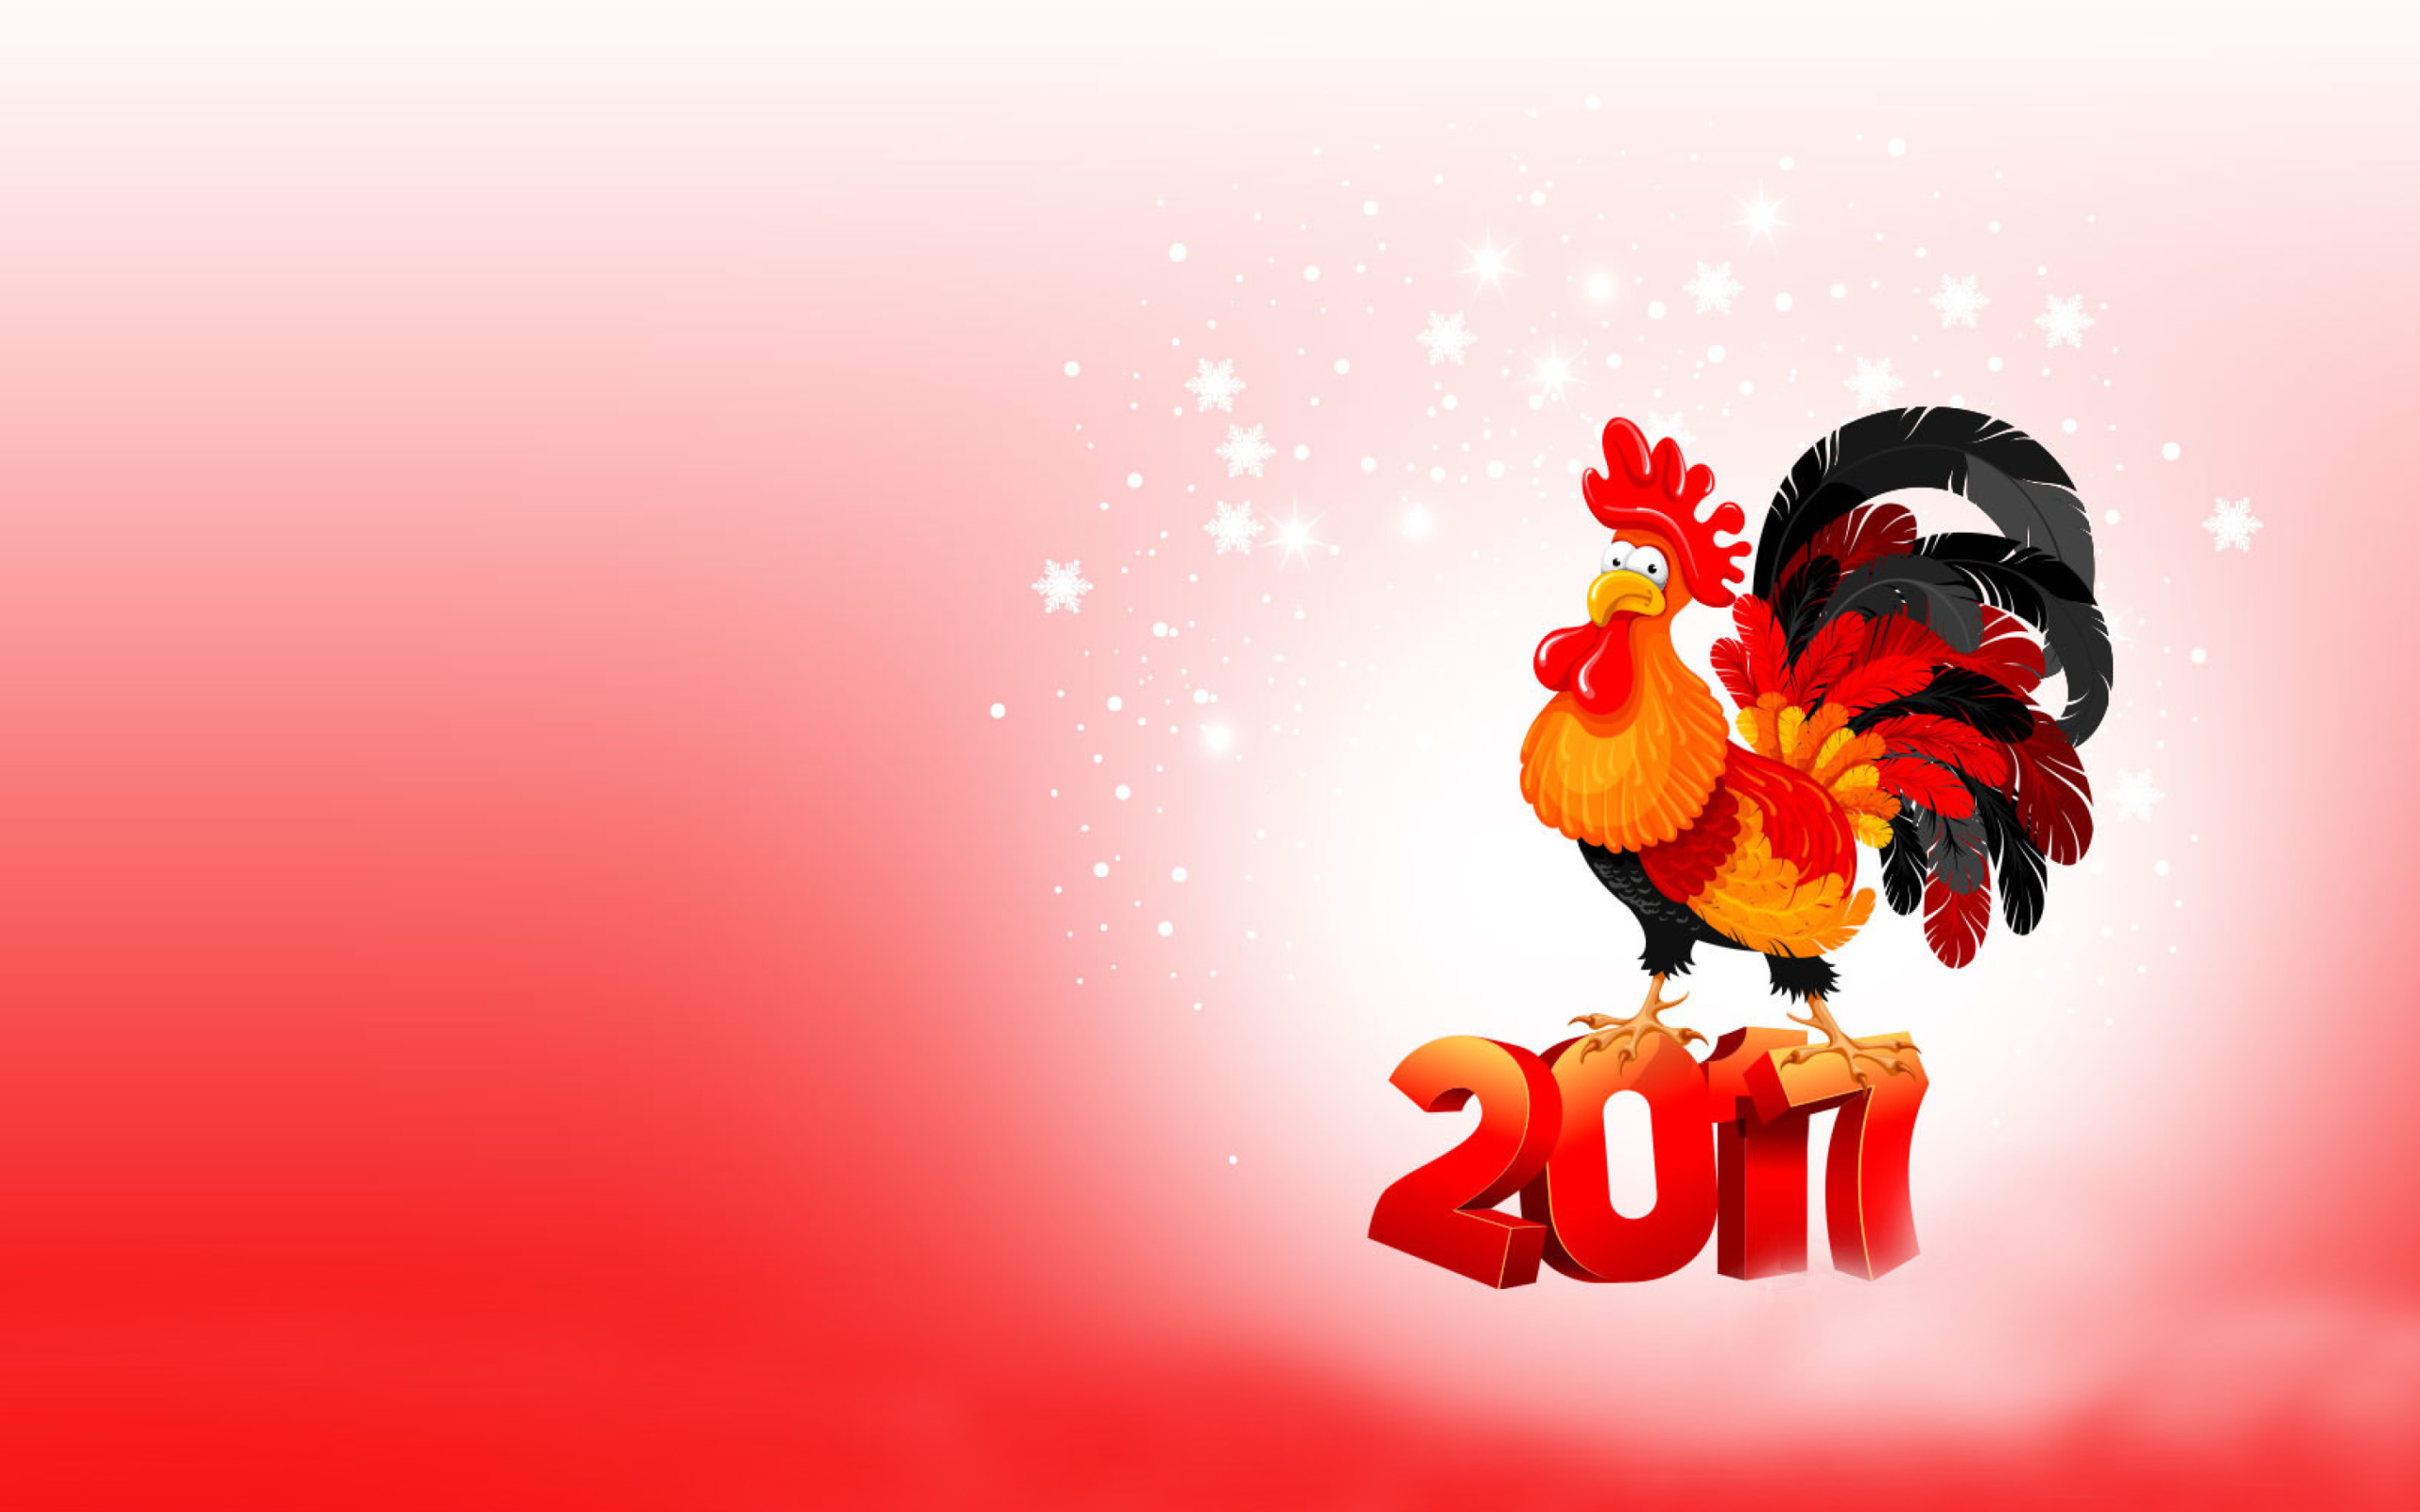 Das 2017 New Year of Cock Wallpaper 2560x1600